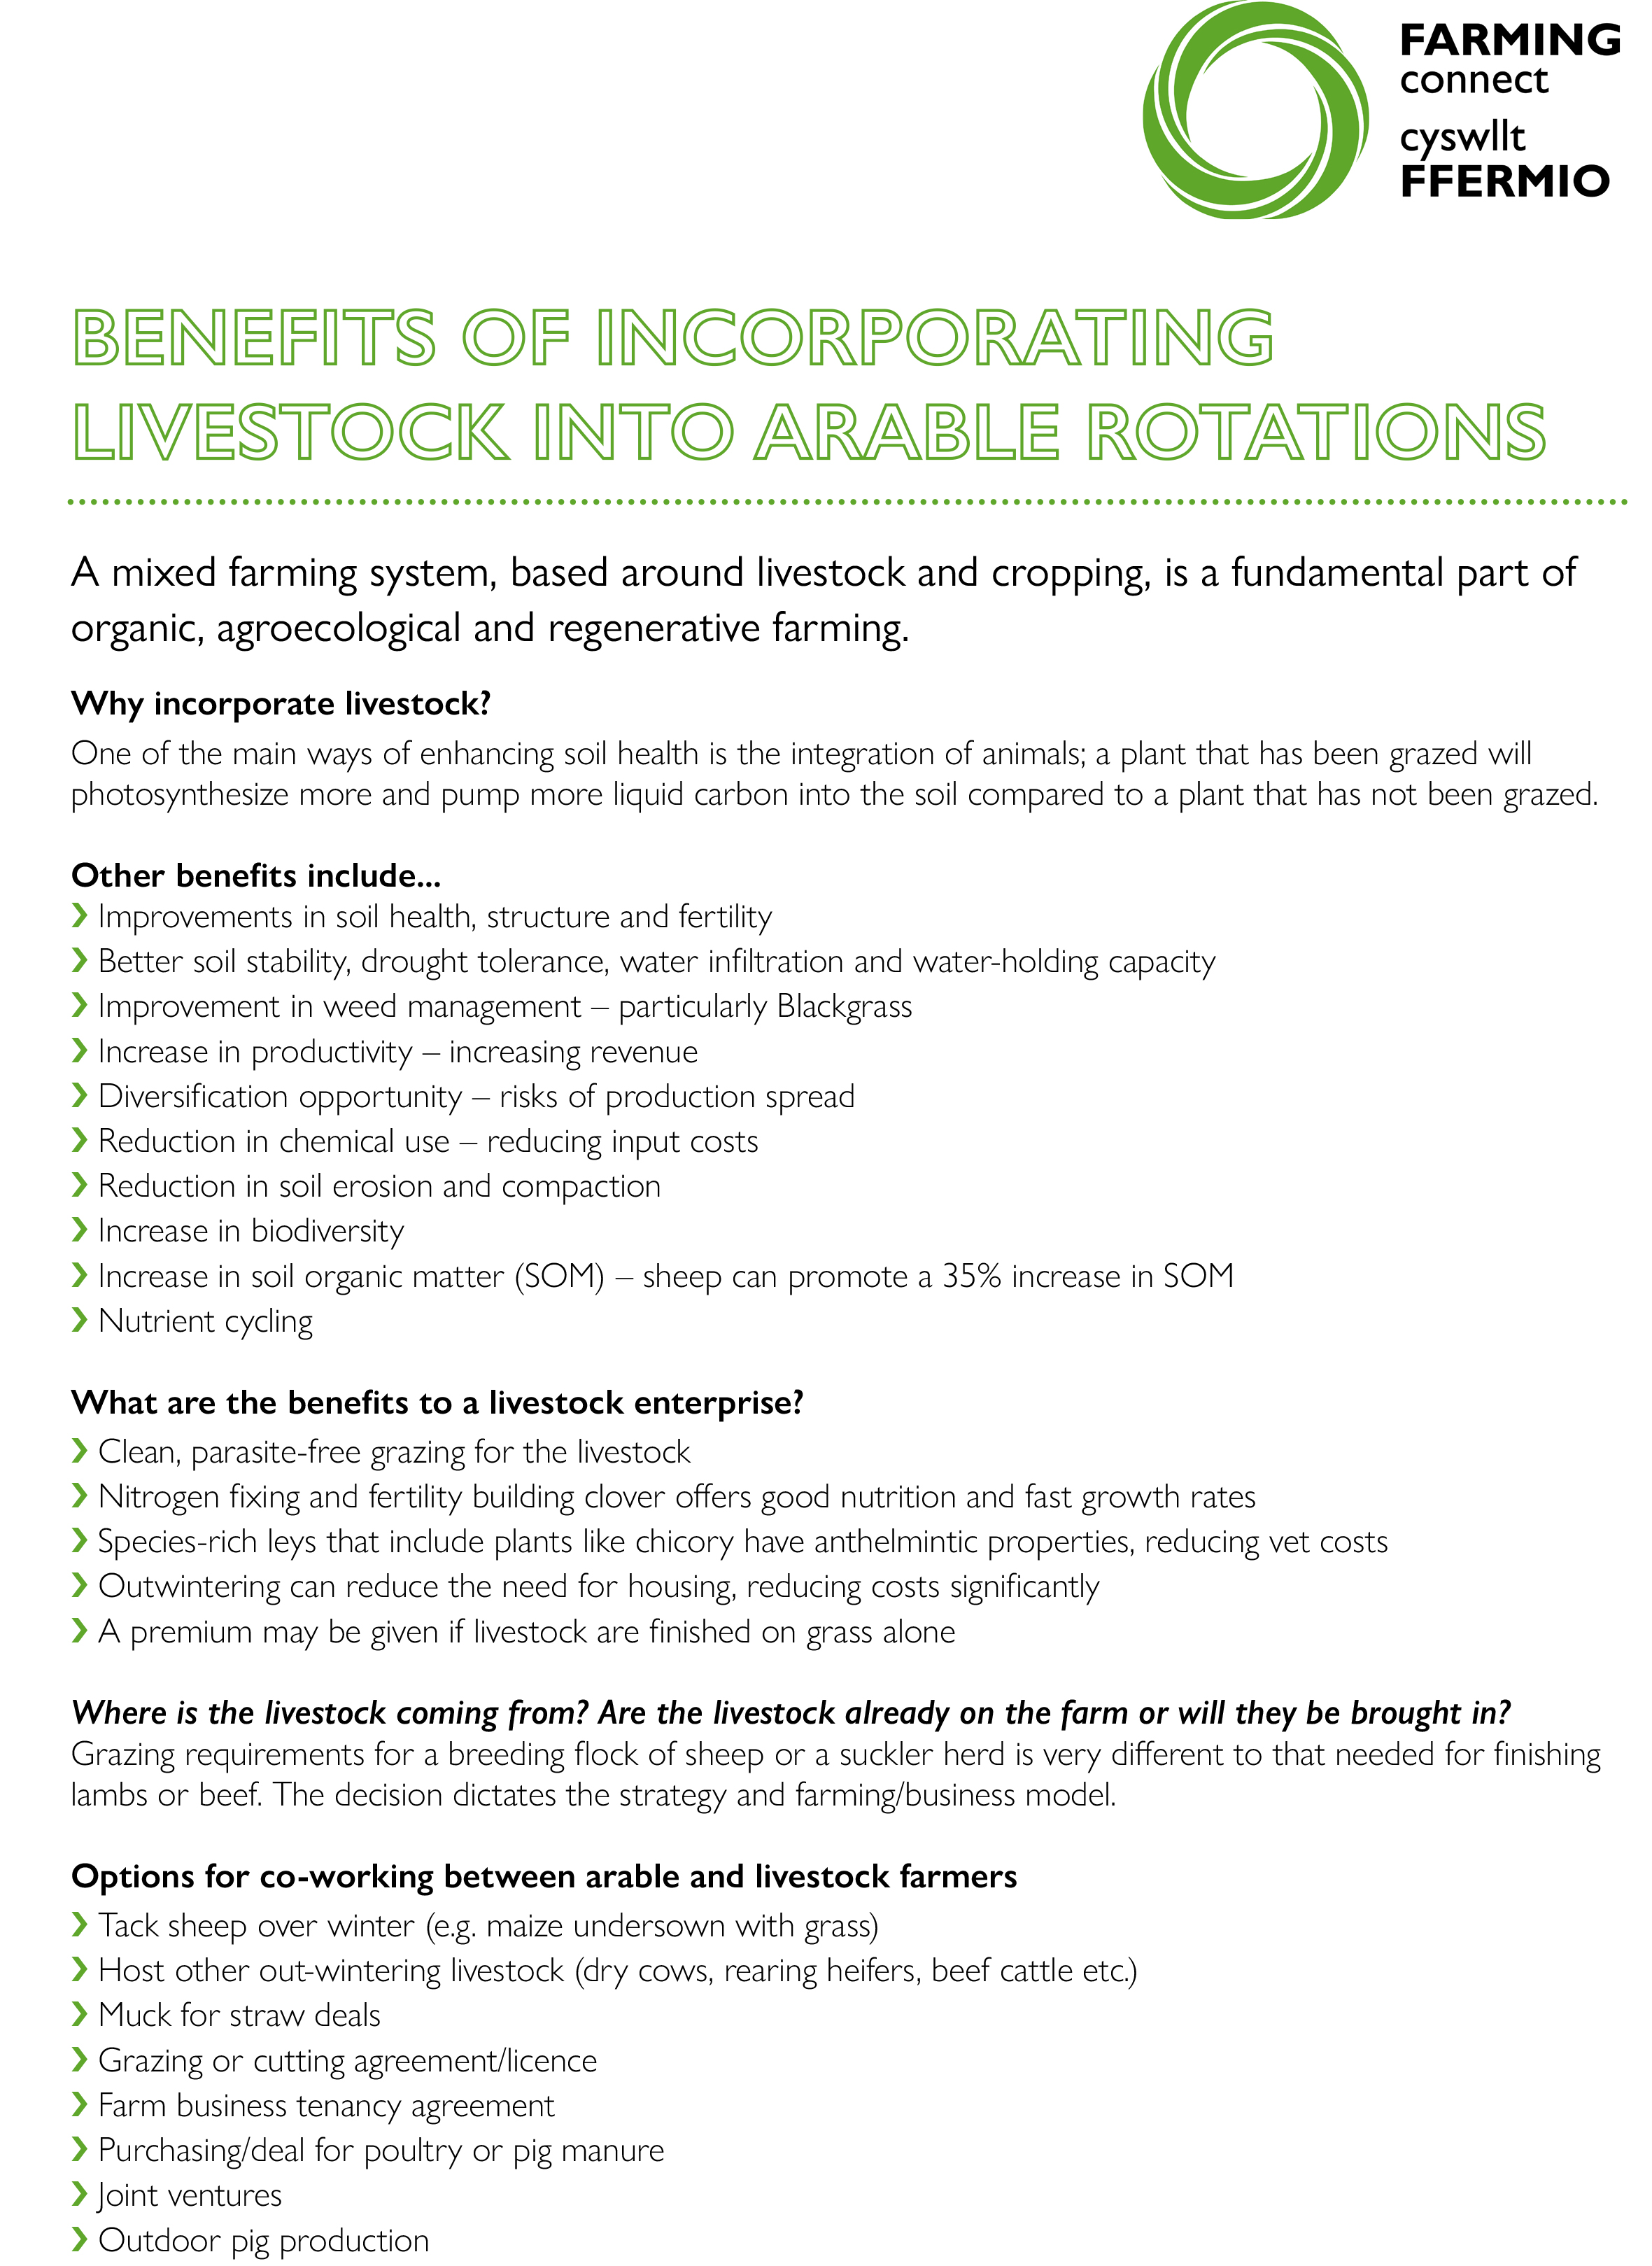 Benefits Of Incorporating Livestock Into Arable Rotations